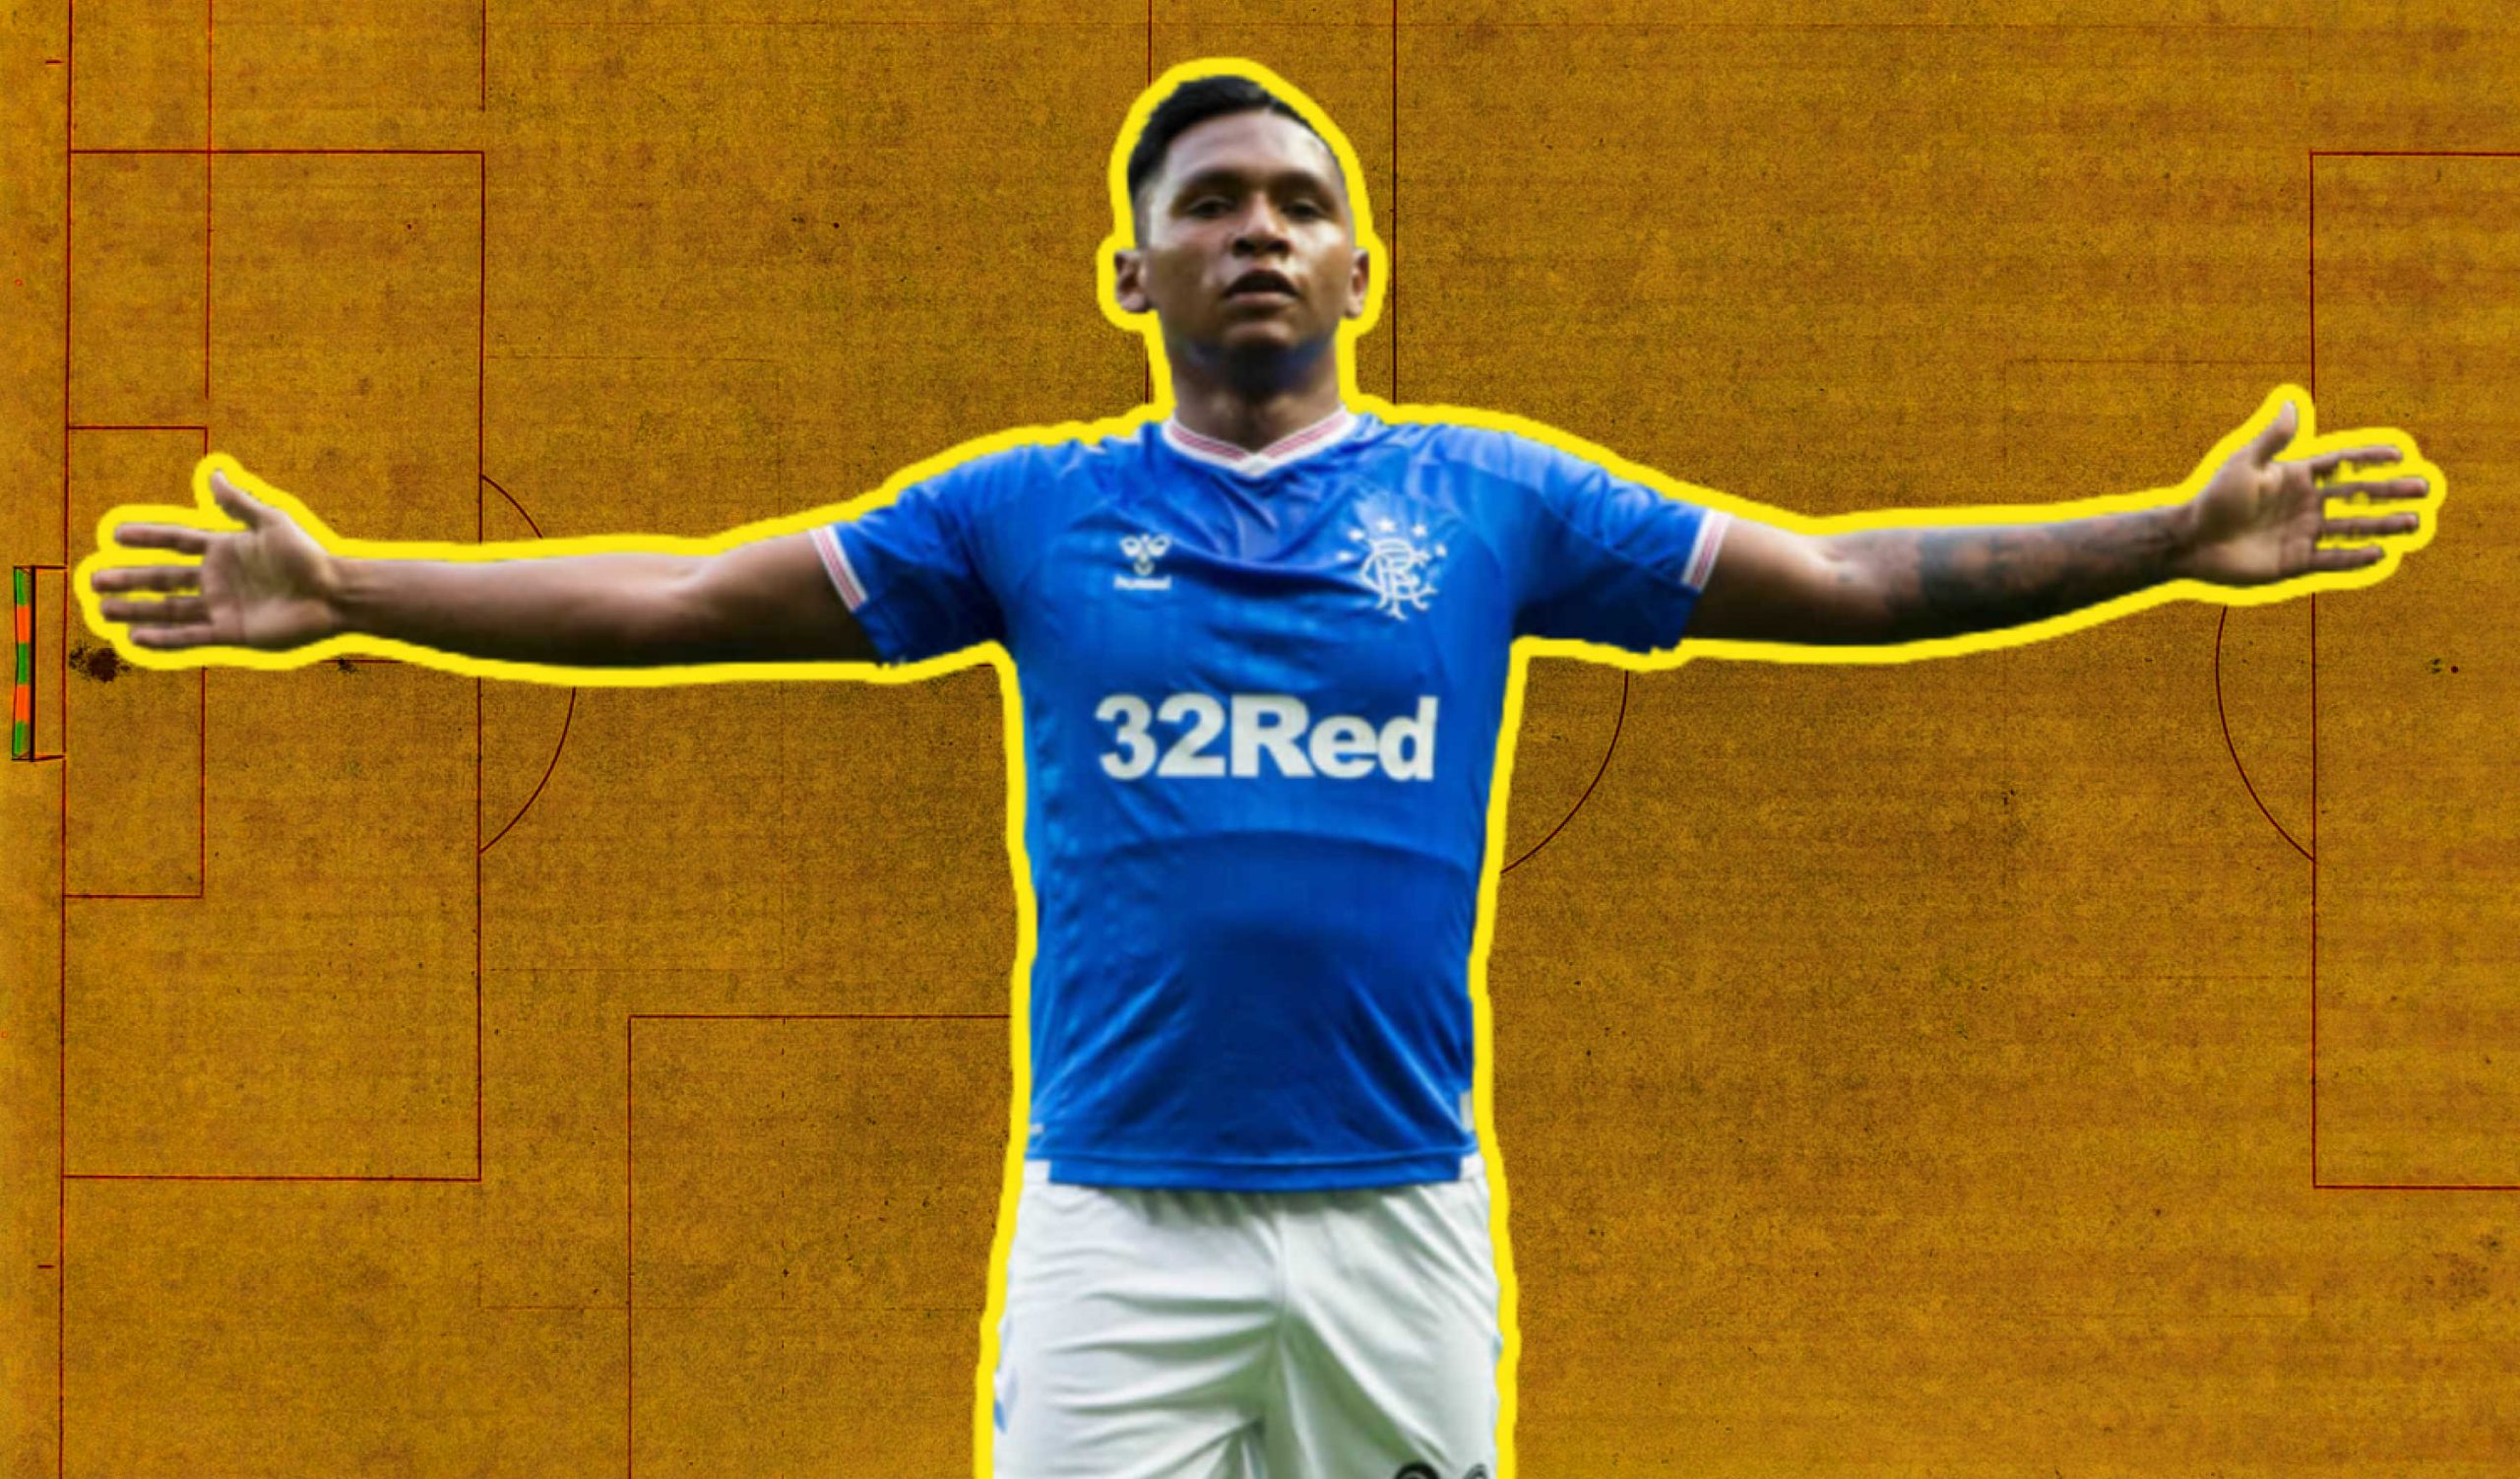 Rangers star Alfredo Morelos gets racially abused while holding a live session on Instagram